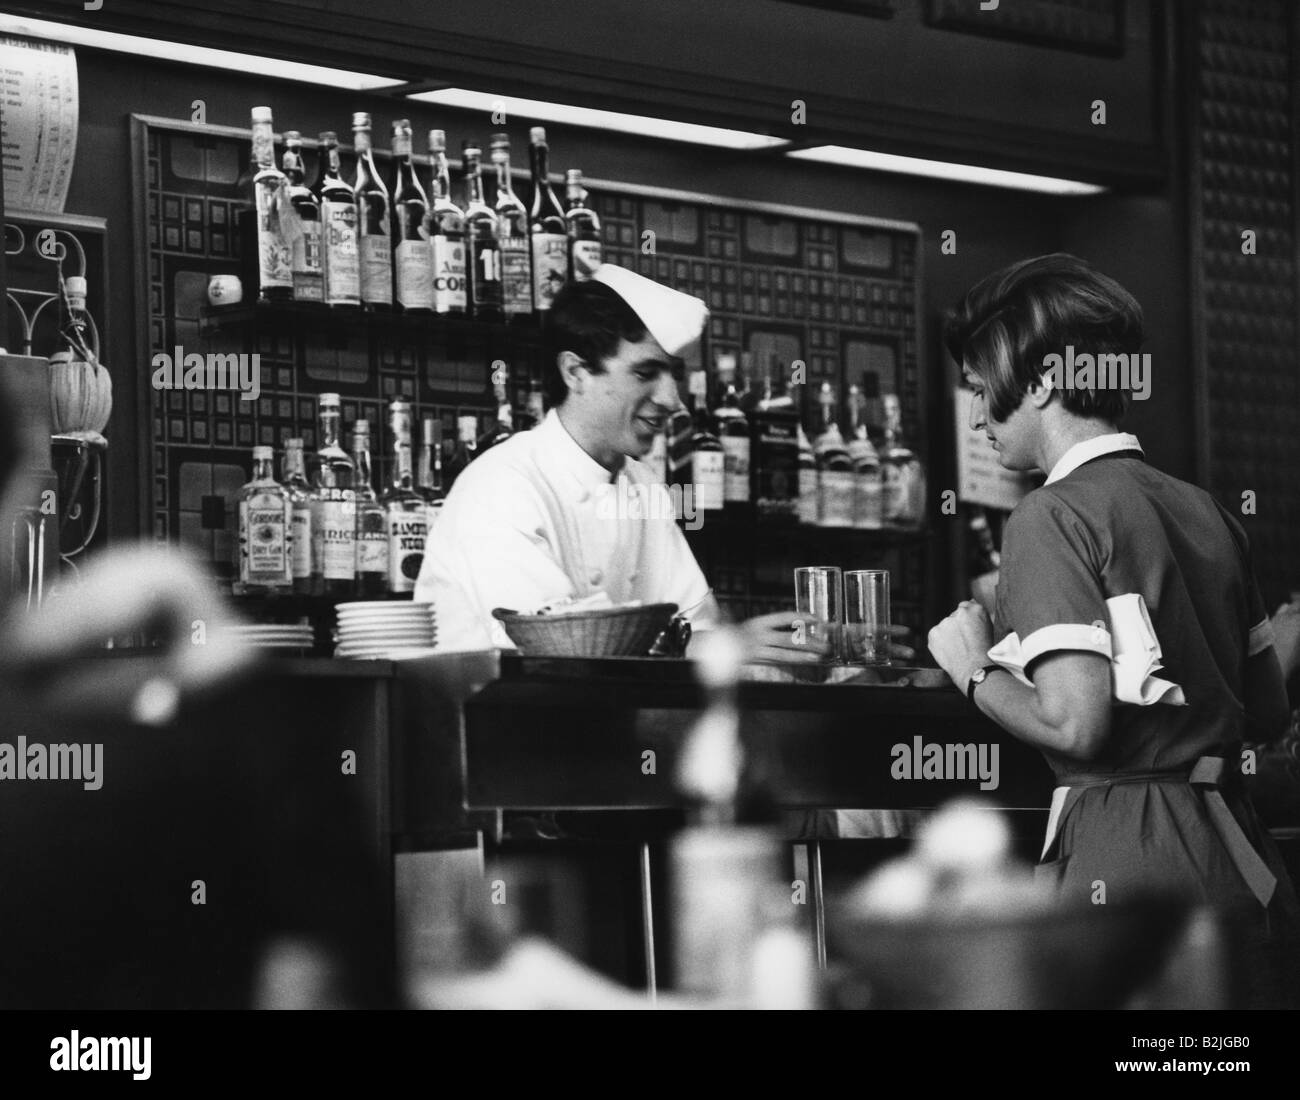 gastronomy, cafe, bartender and waitress in Italian cafe, Italy, bar, barkeeper, bottles, alcohol, alcoholic beverages, historic, historical, people, 20th century, Stock Photo